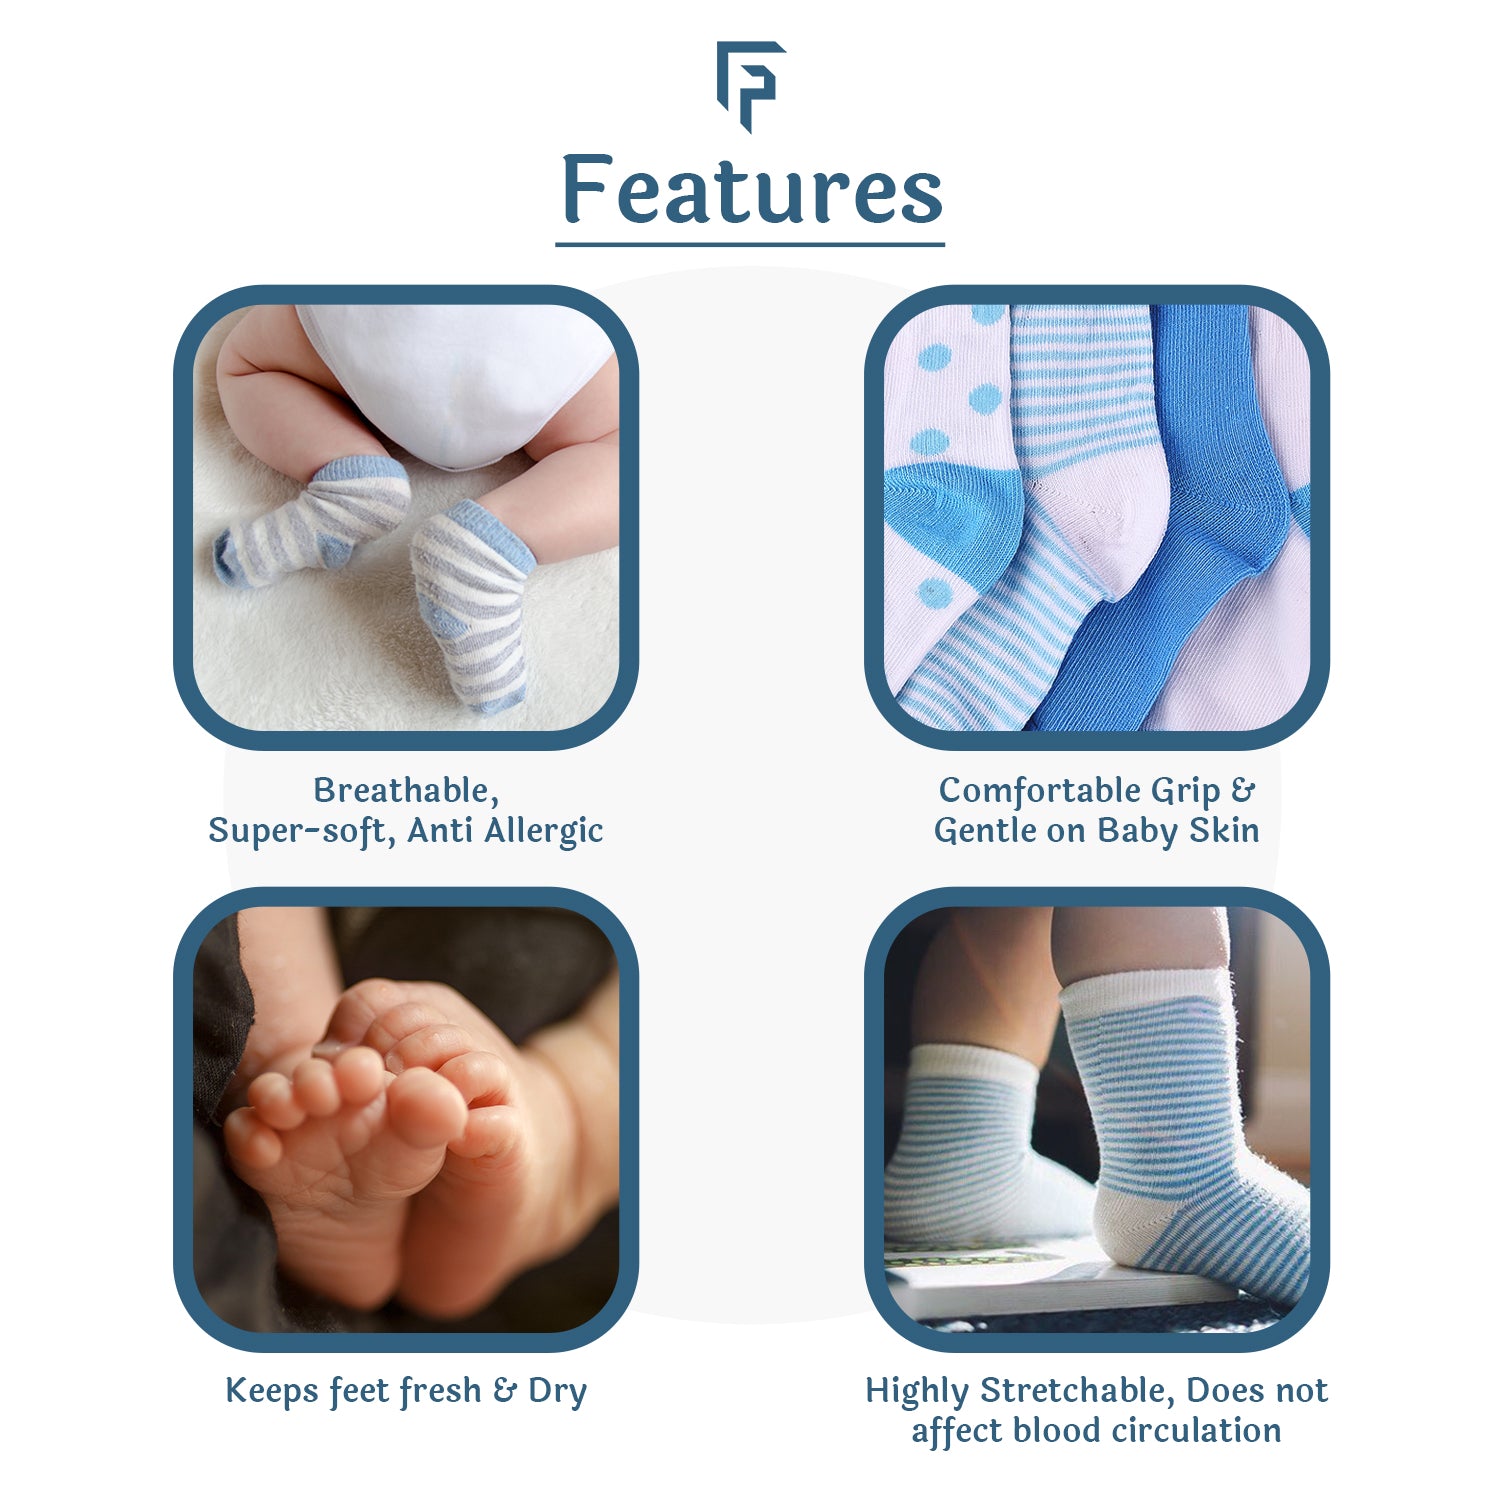 FOOTPRINTS Organic cotton Baby Socks - 3-5 years - Pack of 8 Pairs - Bigdot and Colourful Stripe